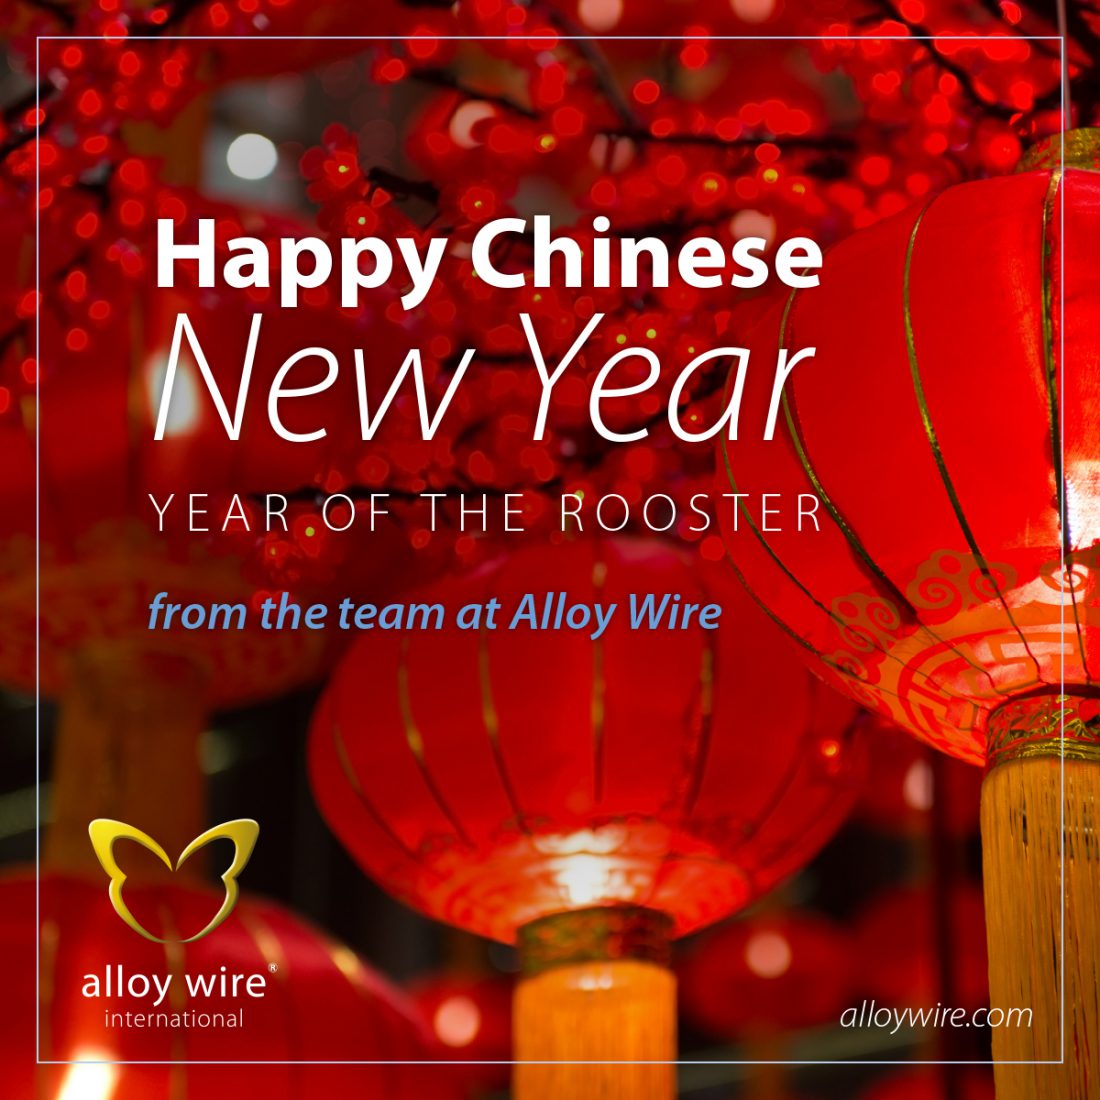 Happy Chinese New Year 2017 - Alloy Wire International 9